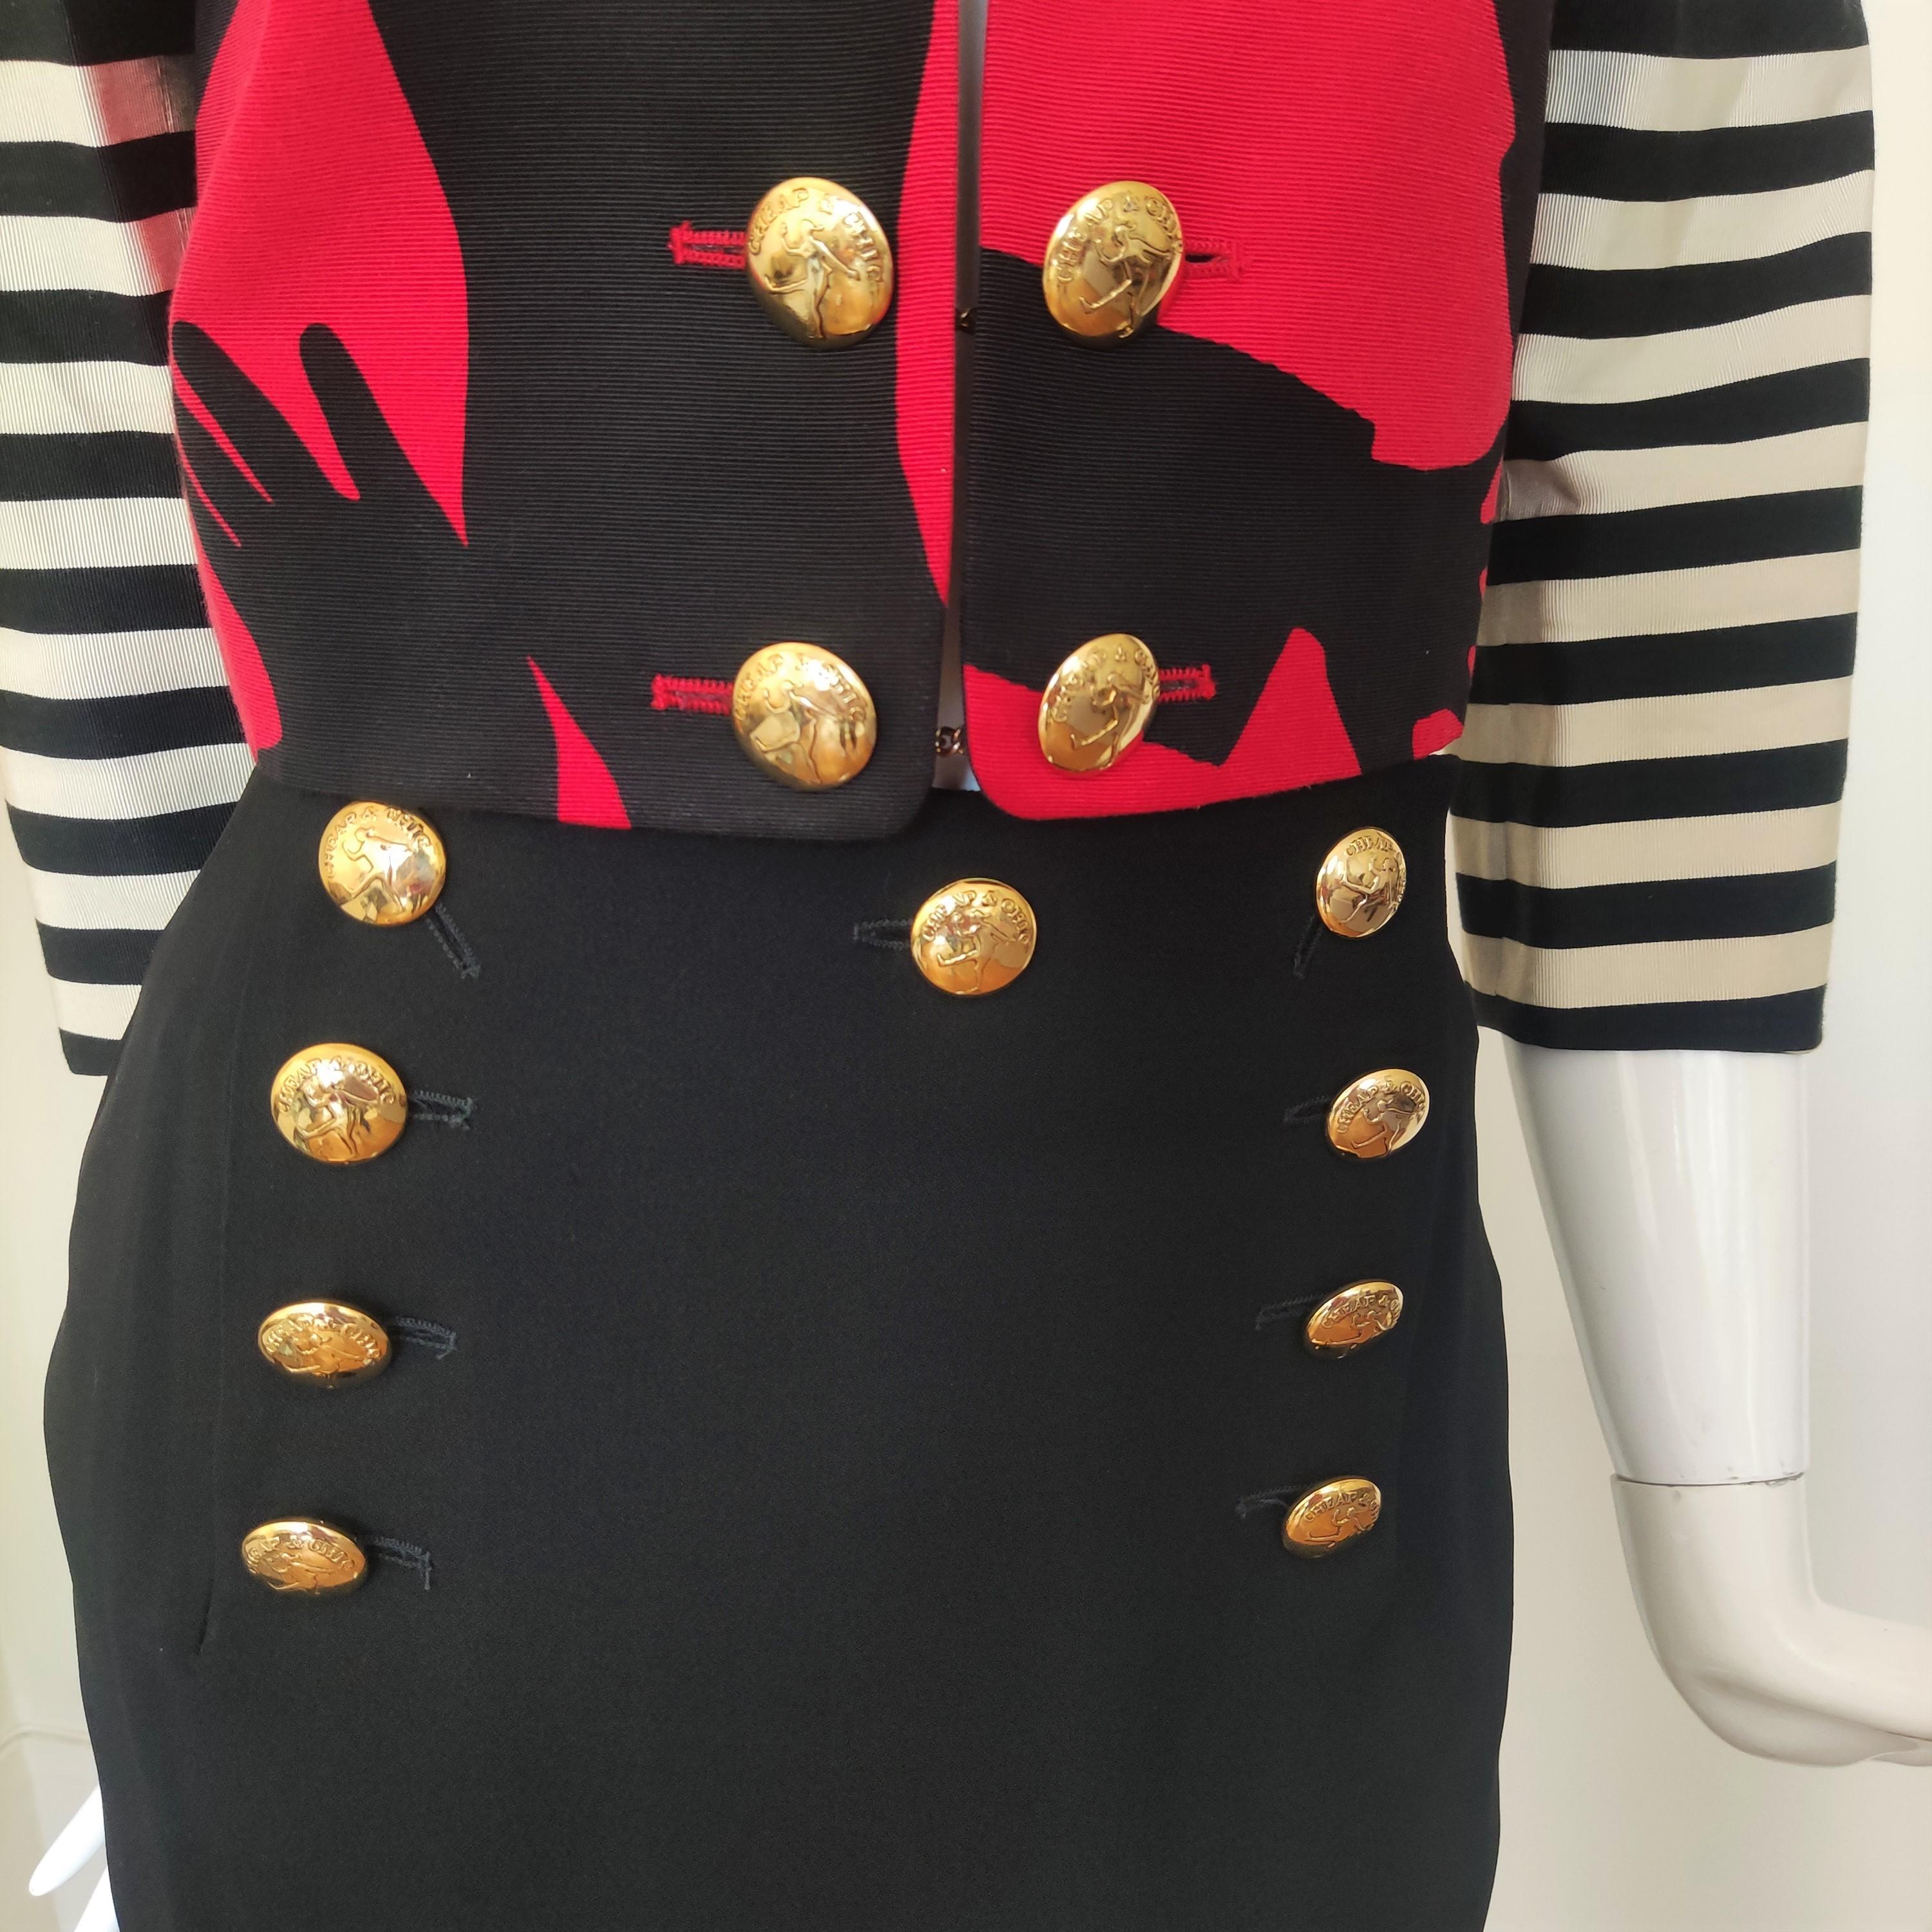 Moschino Cheap and Chic Olive Oyl Popeye Arms Legs Shadow The Nanny Couture Suit For Sale 7